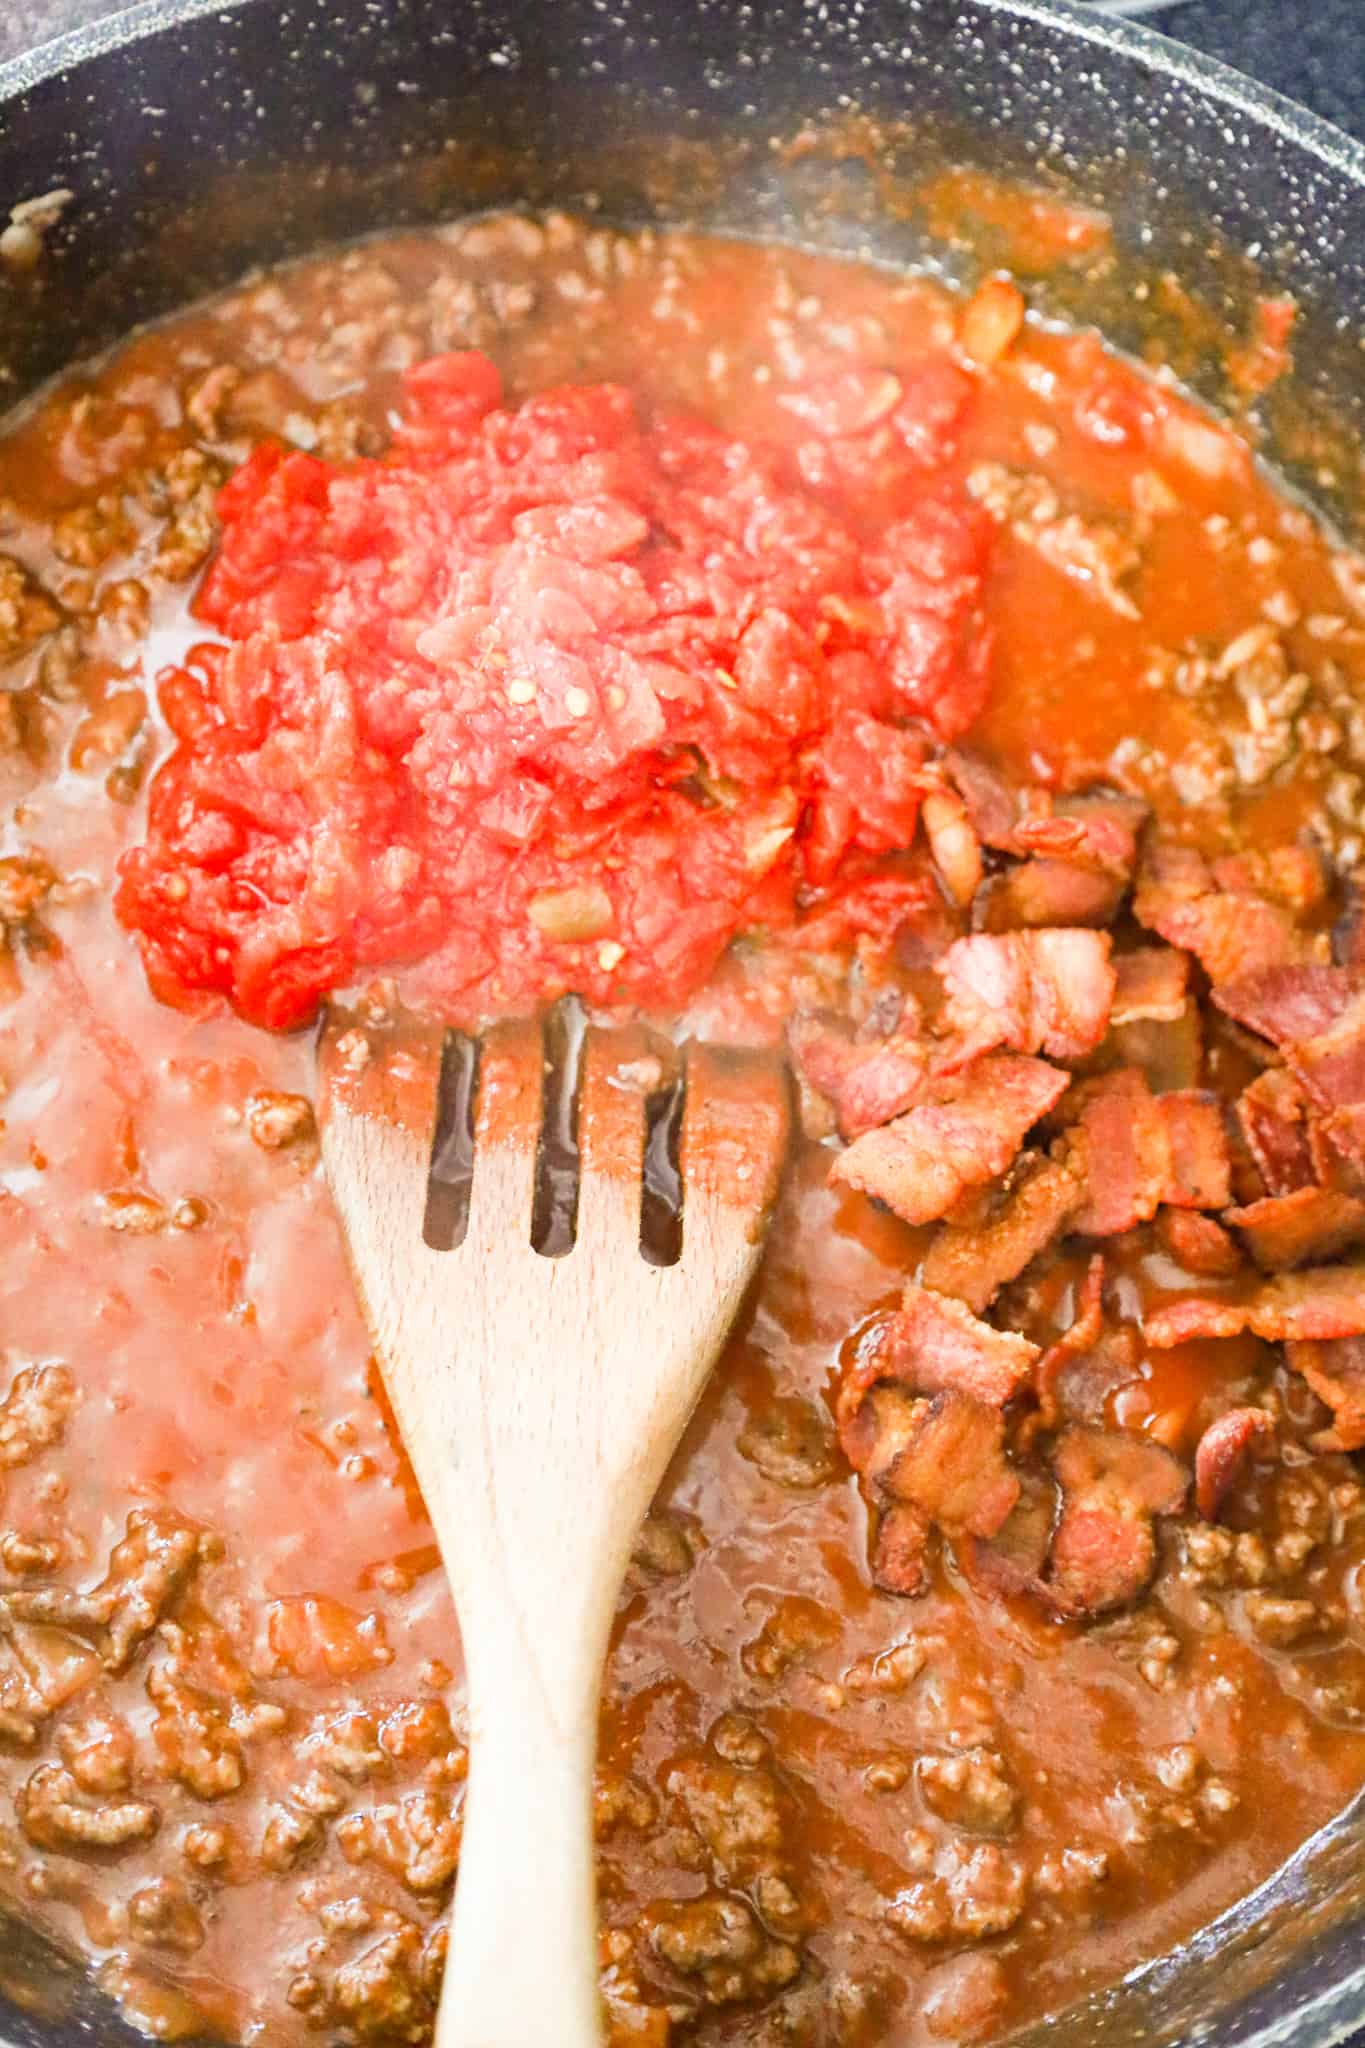 Rotel and cooked bacon pieces on top of ground beef and sauce mixture in a skillet